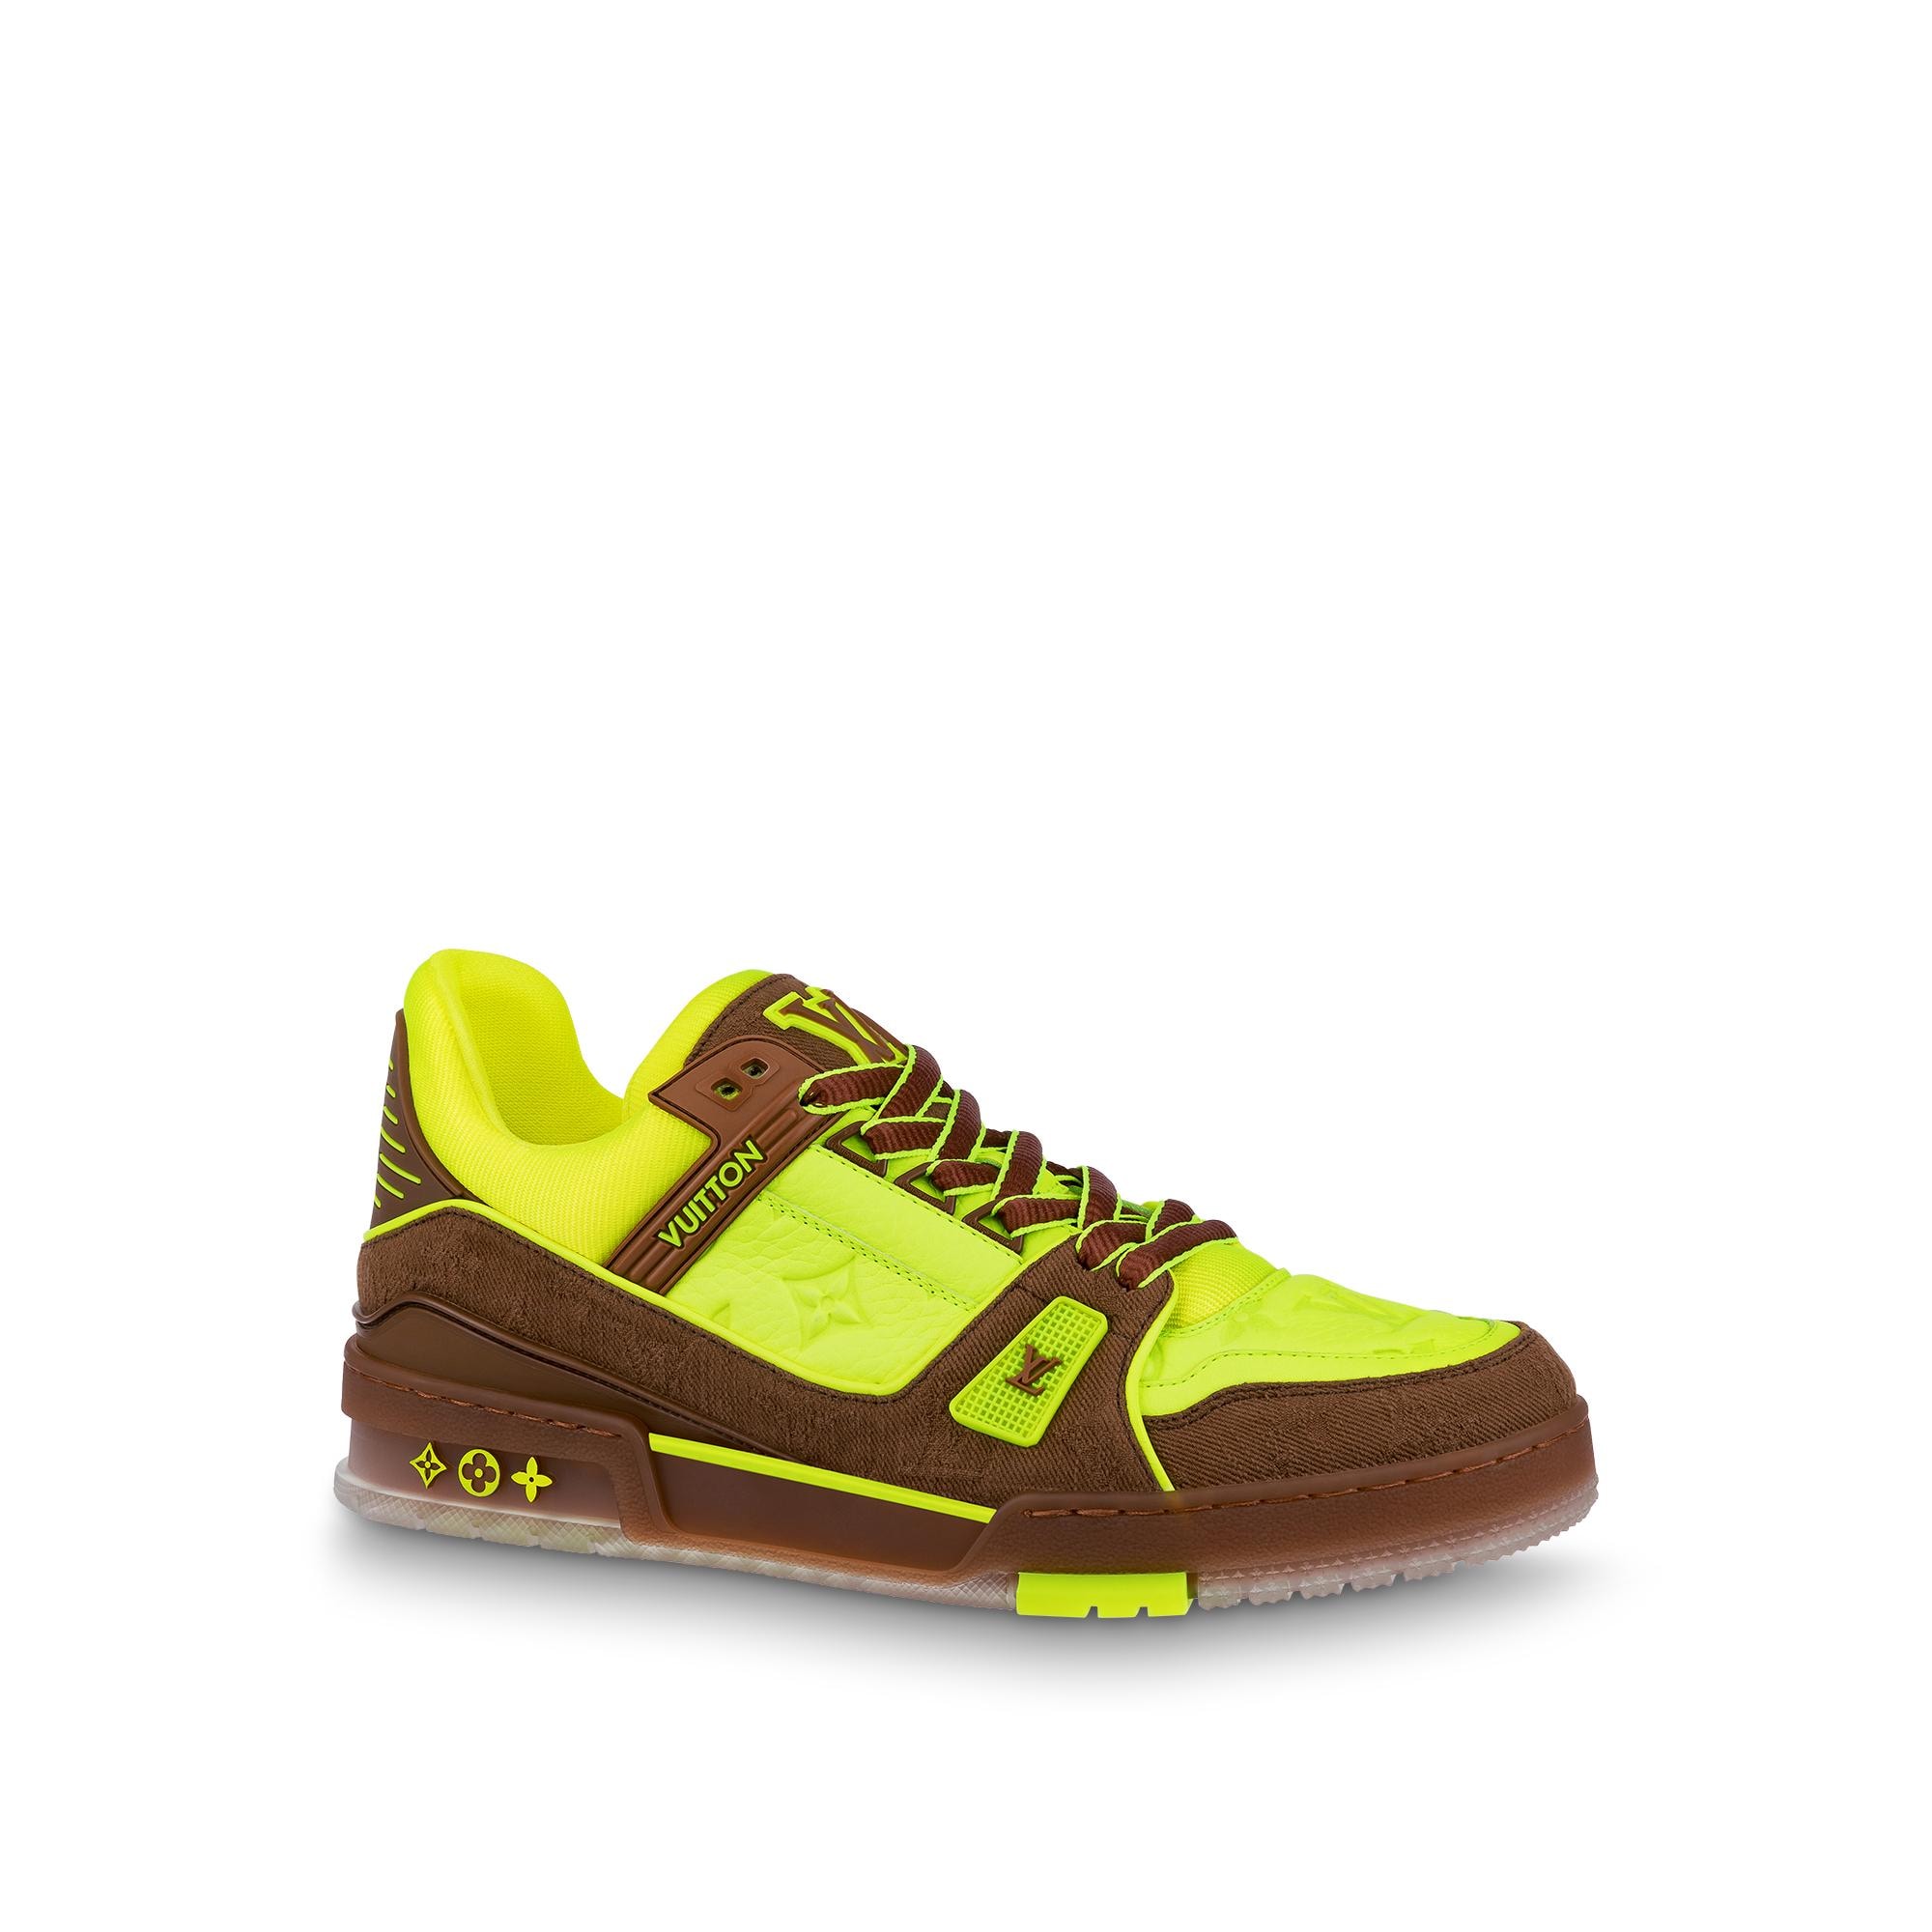 Louis Vuitton LV Trainer Sneaker in Yellow - Shoes 1A8Z6K